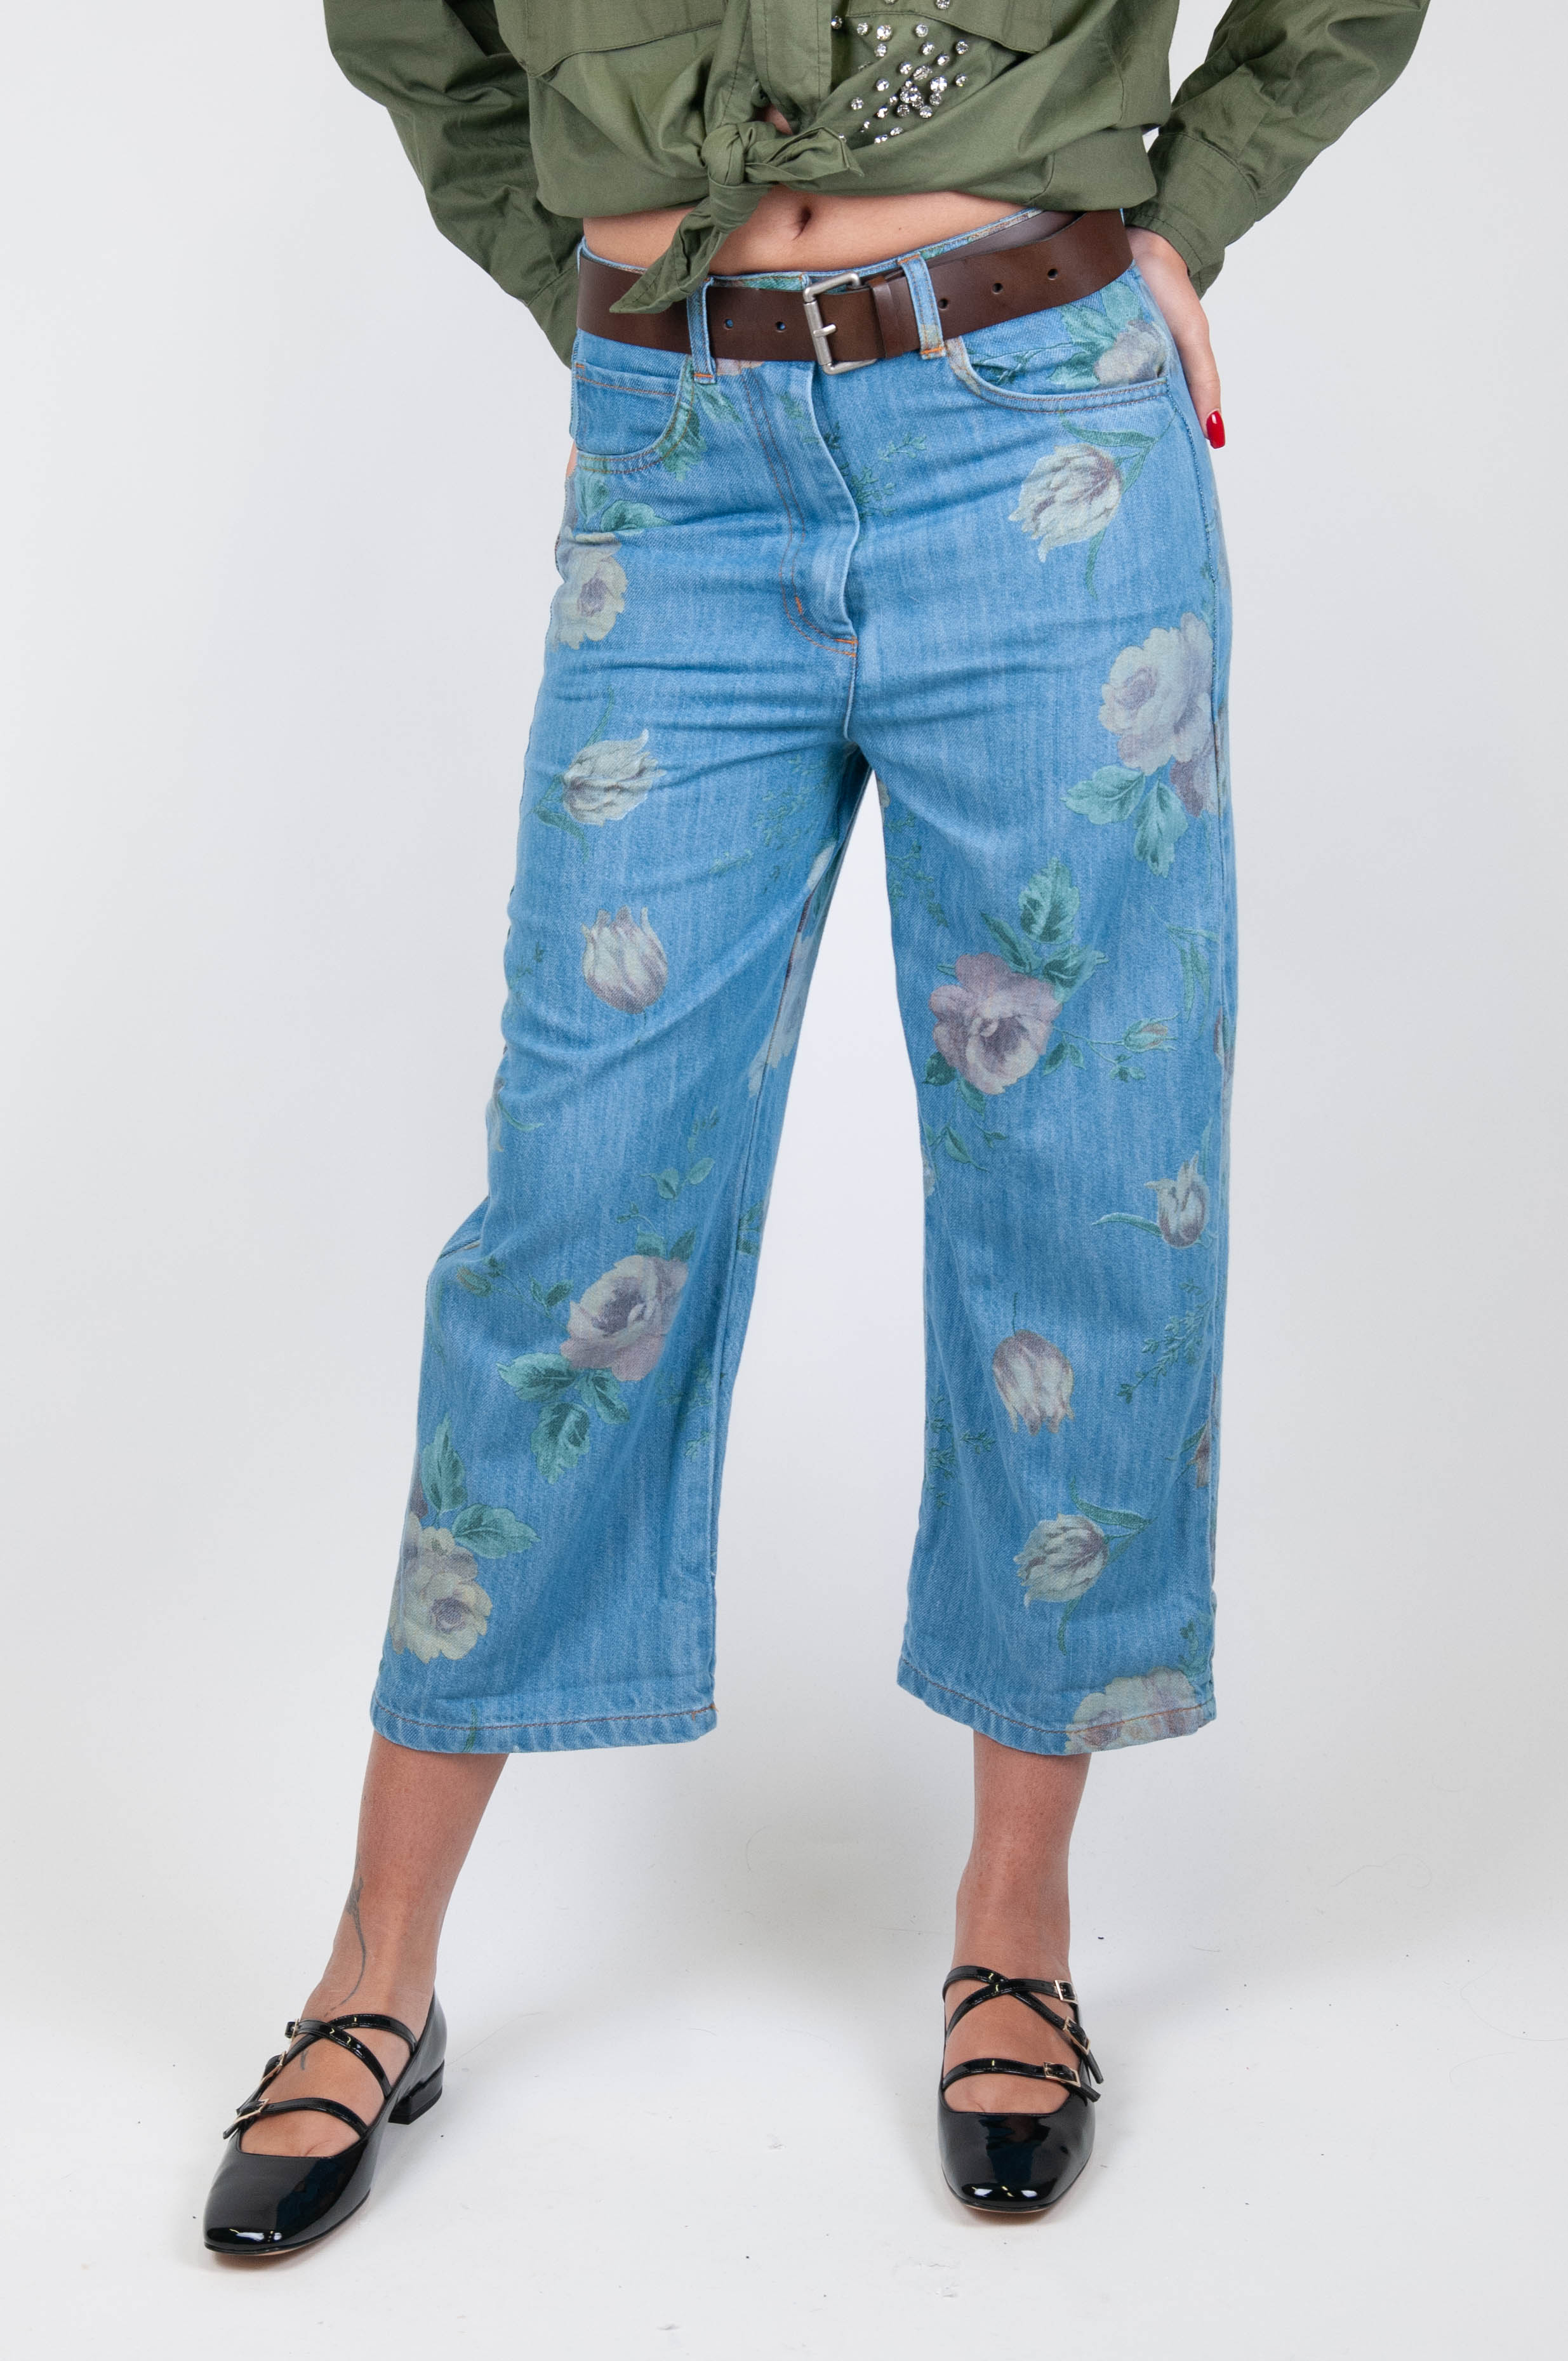 Tensione in - Jeans fantasia floreale